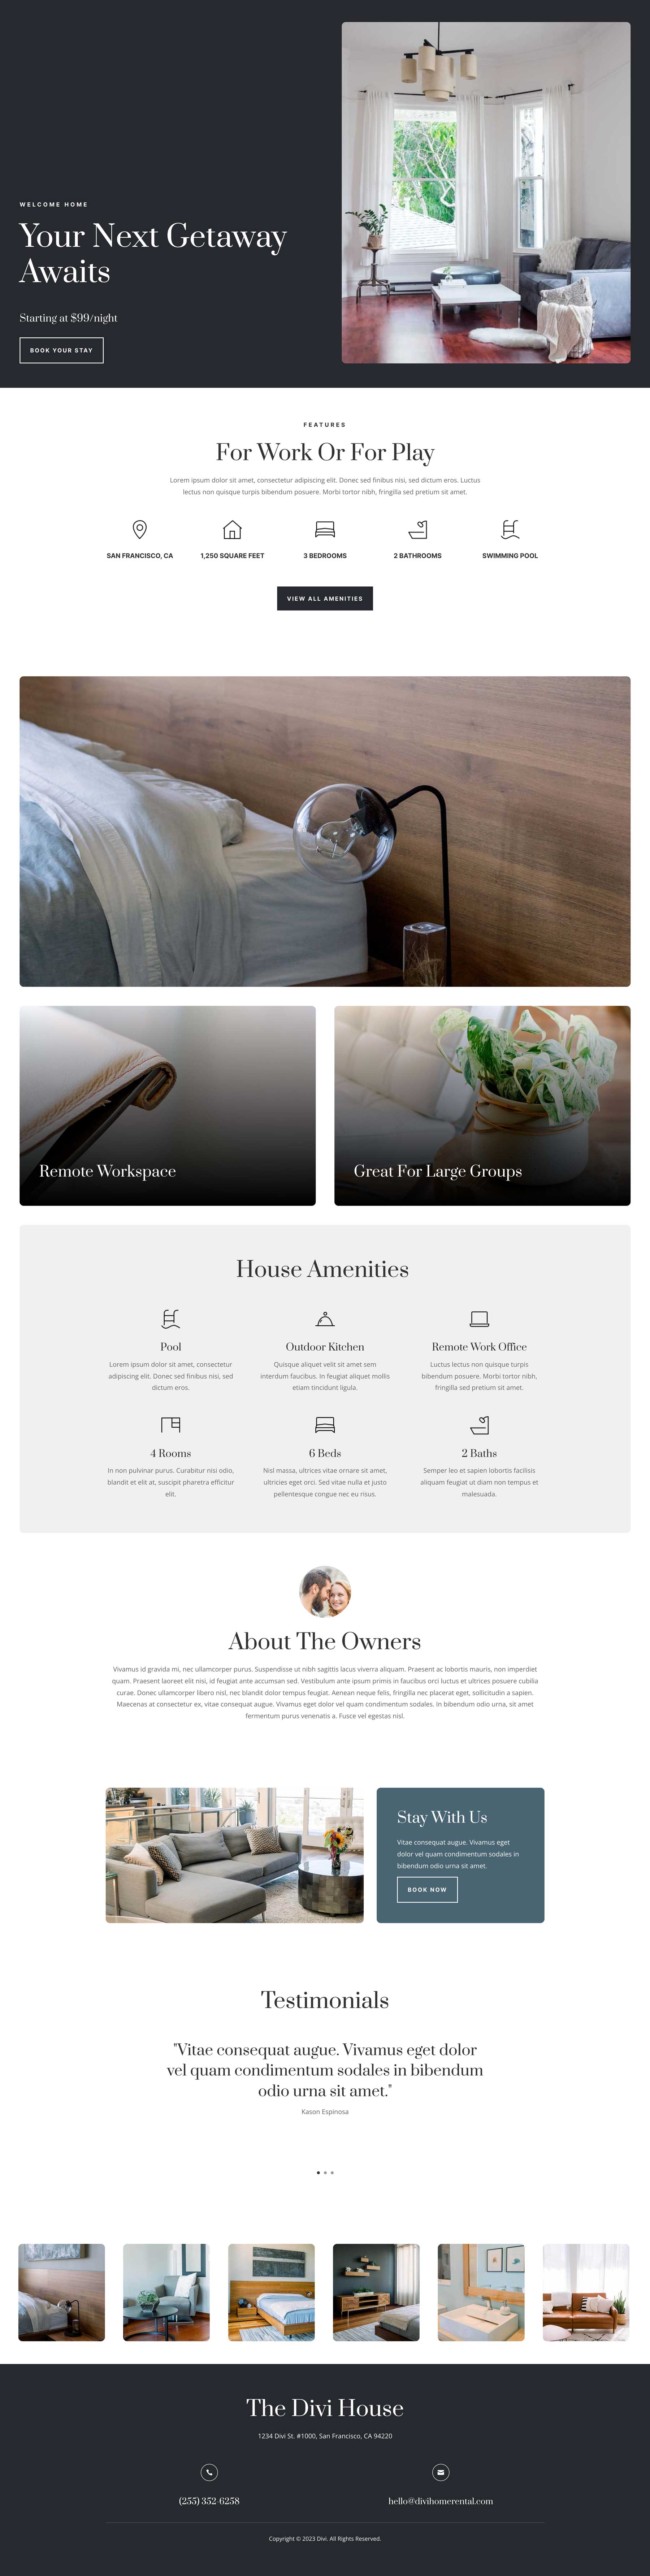 Home Rental layout pack